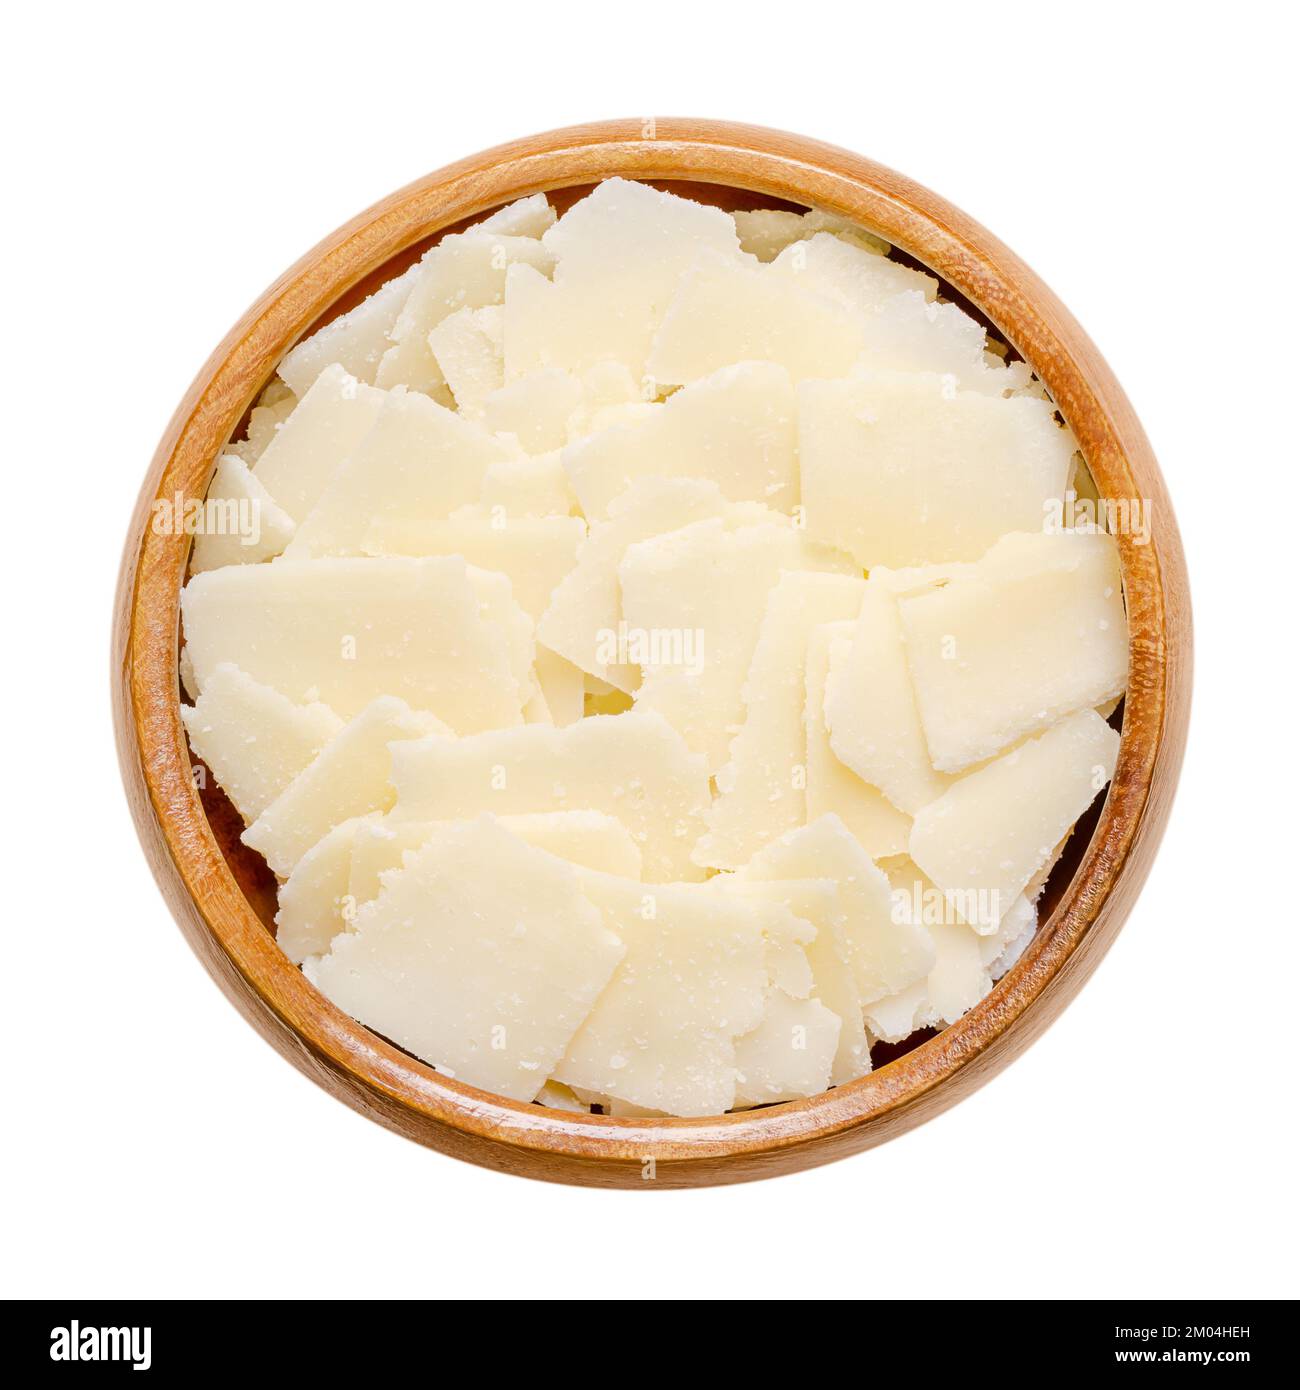 Grana Padano cheese flakes, in a wooden bowl. Italian hard cheese, similar to Parmesan, crumbly-textured, with strong savory flavor and gritty texture. Stock Photo